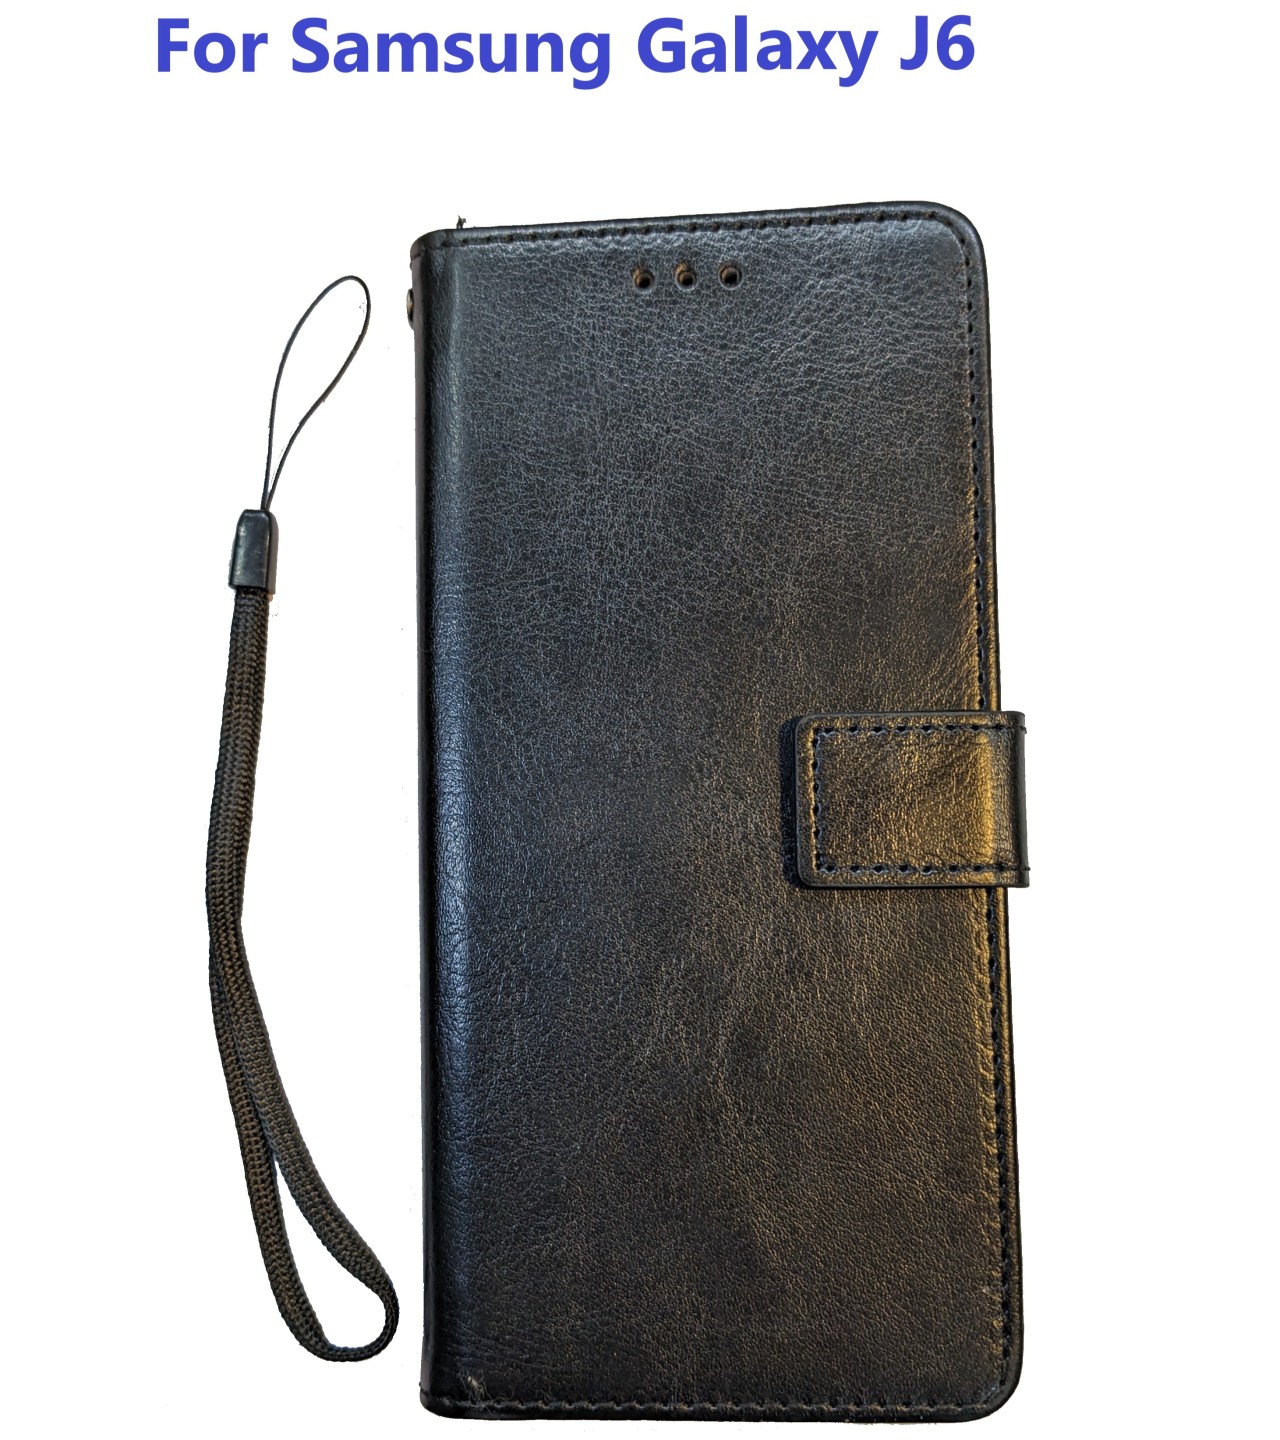 Flip book Wallet Leather Samsung Galaxy J6 Case with magnetic layer